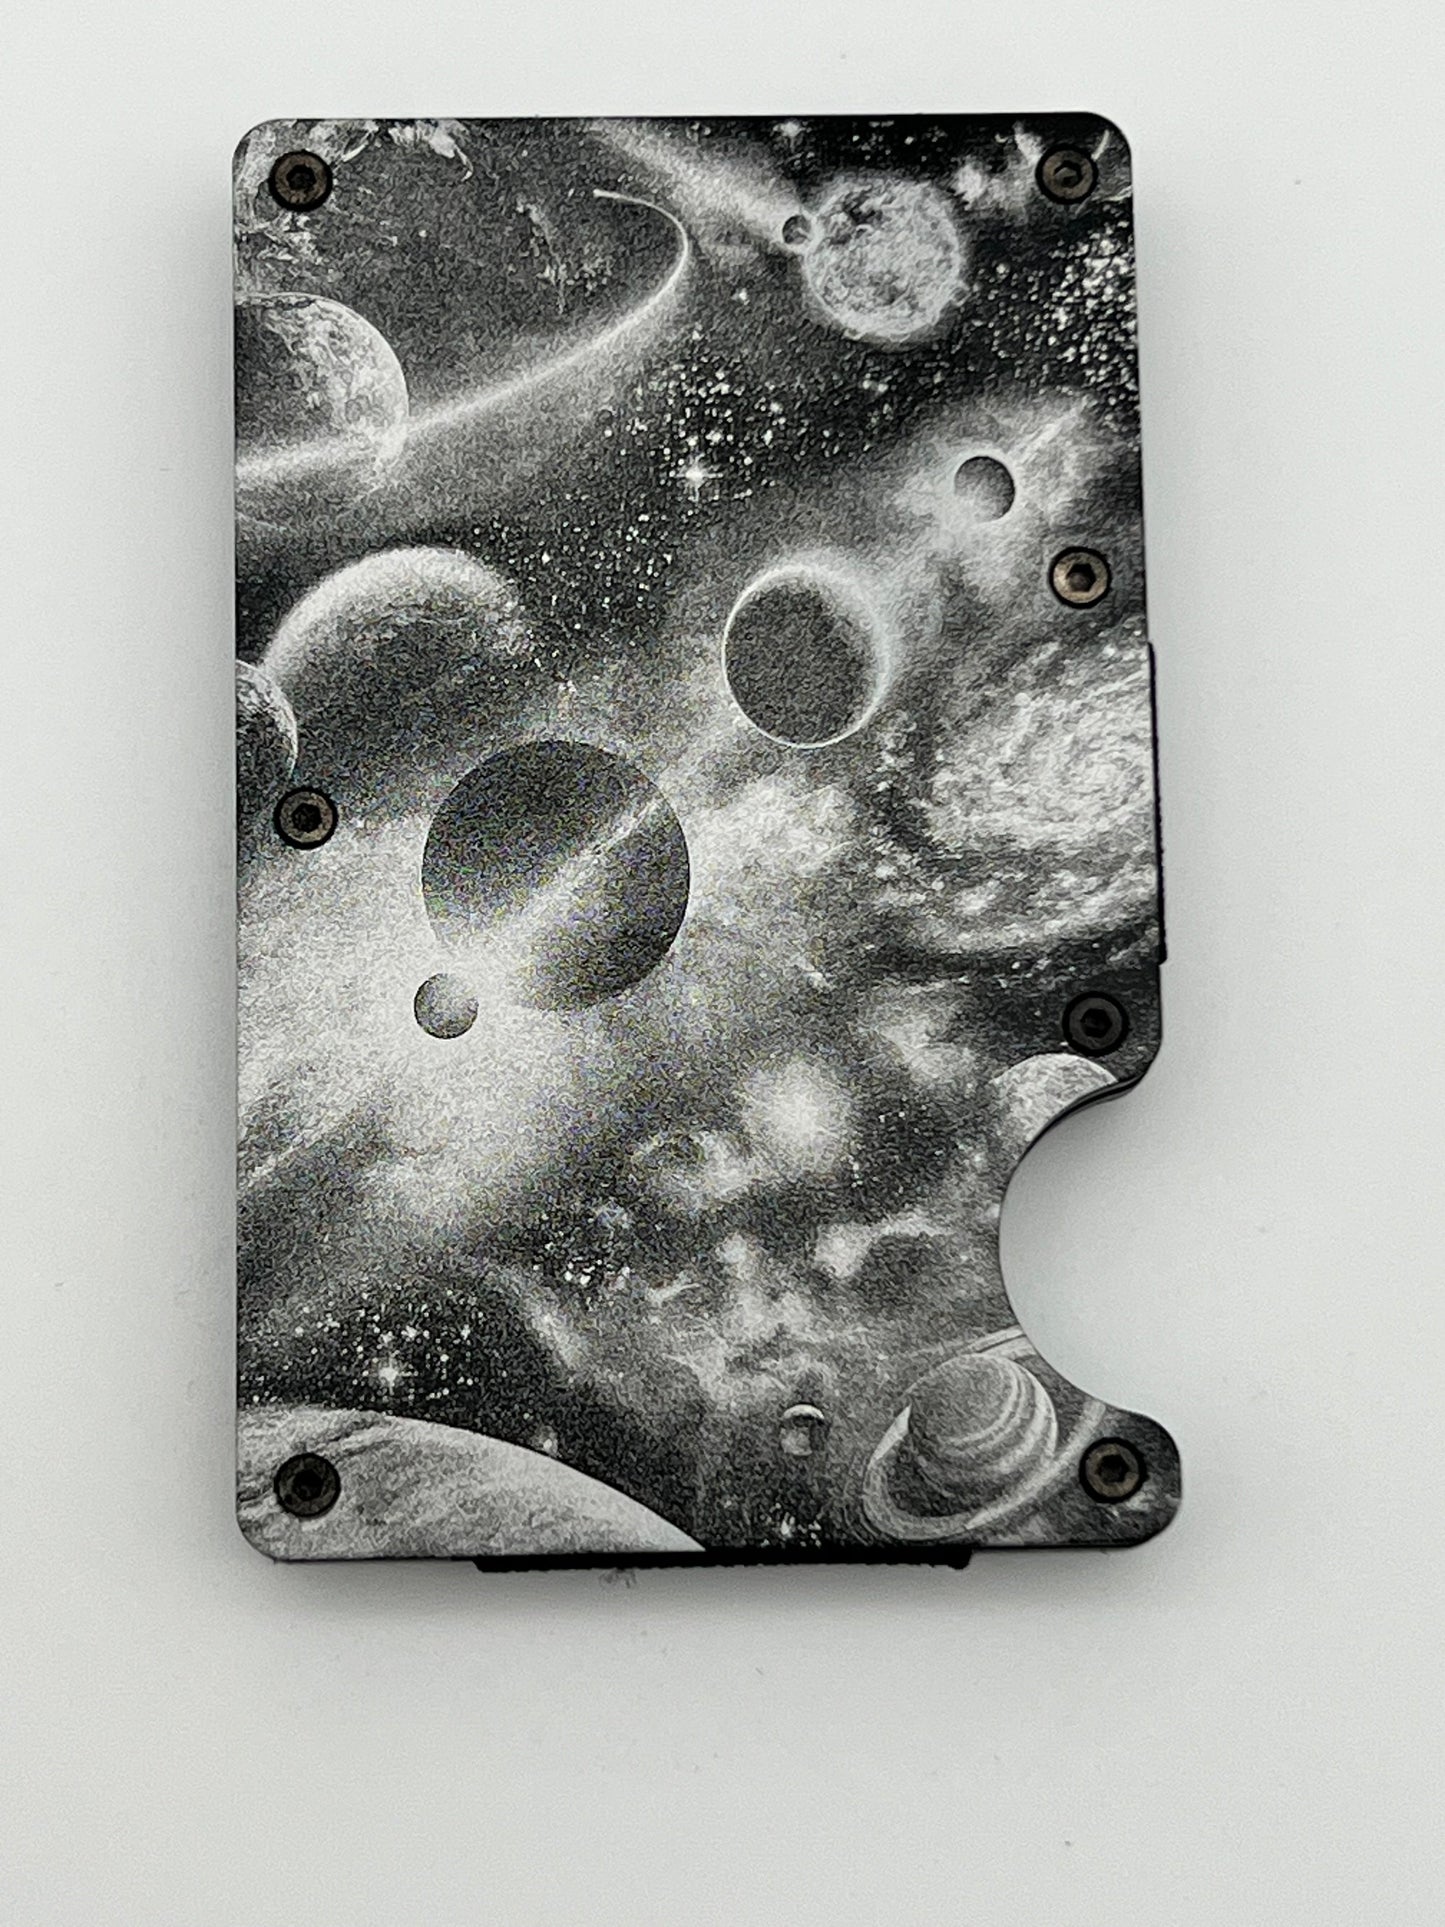 Metal Wallet With Money Clip (Outer Space)